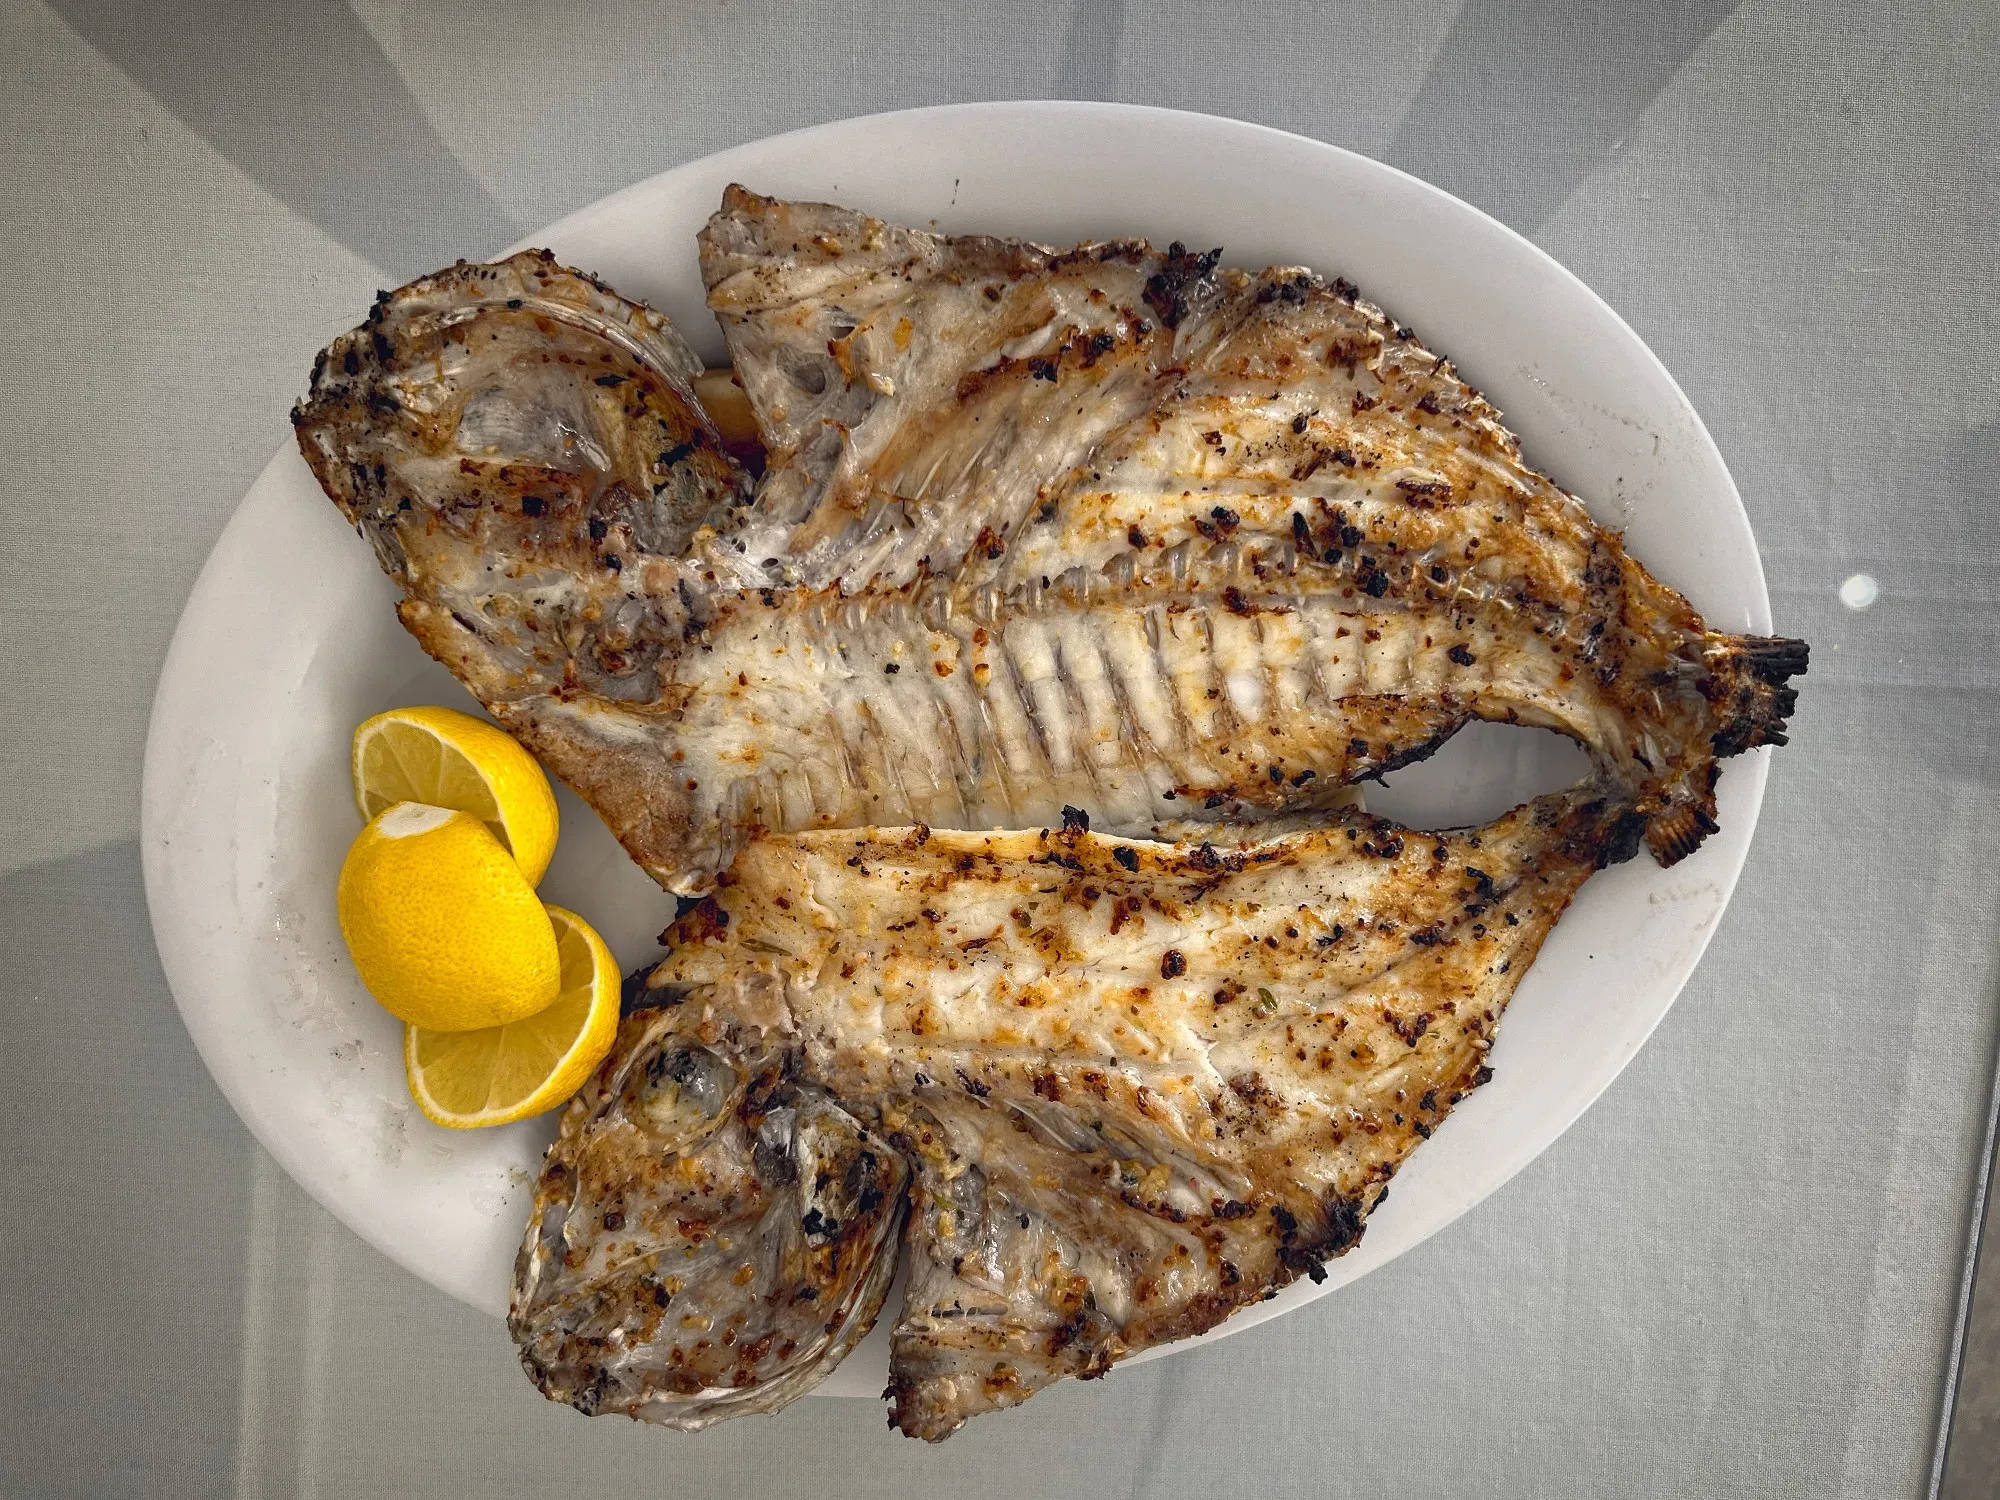 A whole fish split in half and opened up on the plate, overhead shot.